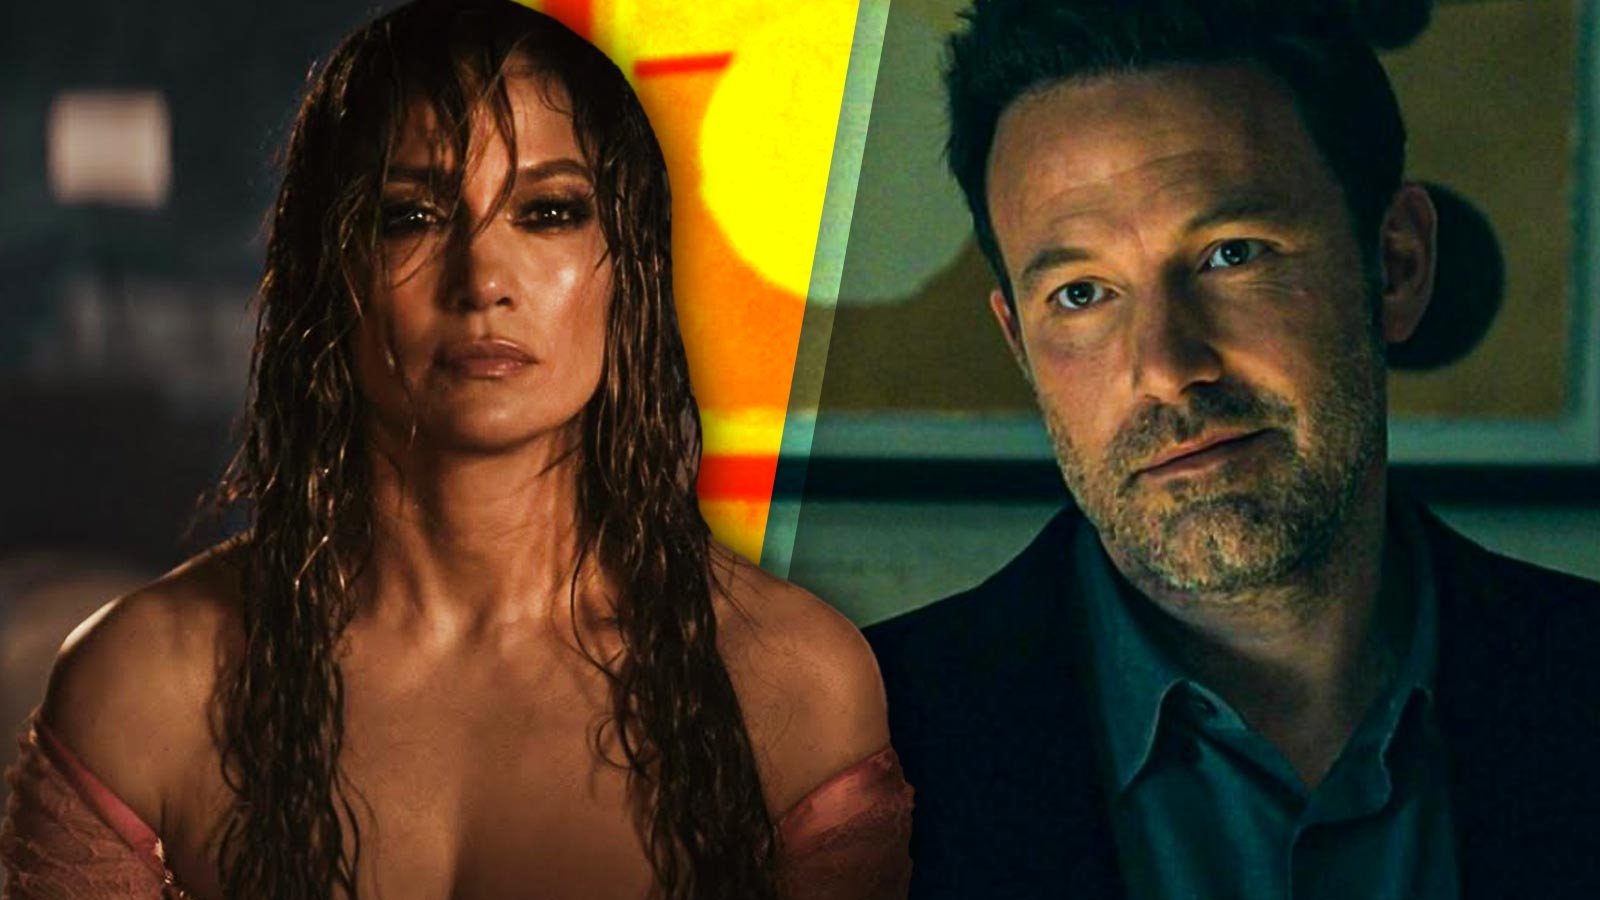 “It was the worst year of his life”: Jennifer Lopez and Ben Affleck’s Whirlwind Reunion and Marriage Affected One Person the Most – Insider Claims